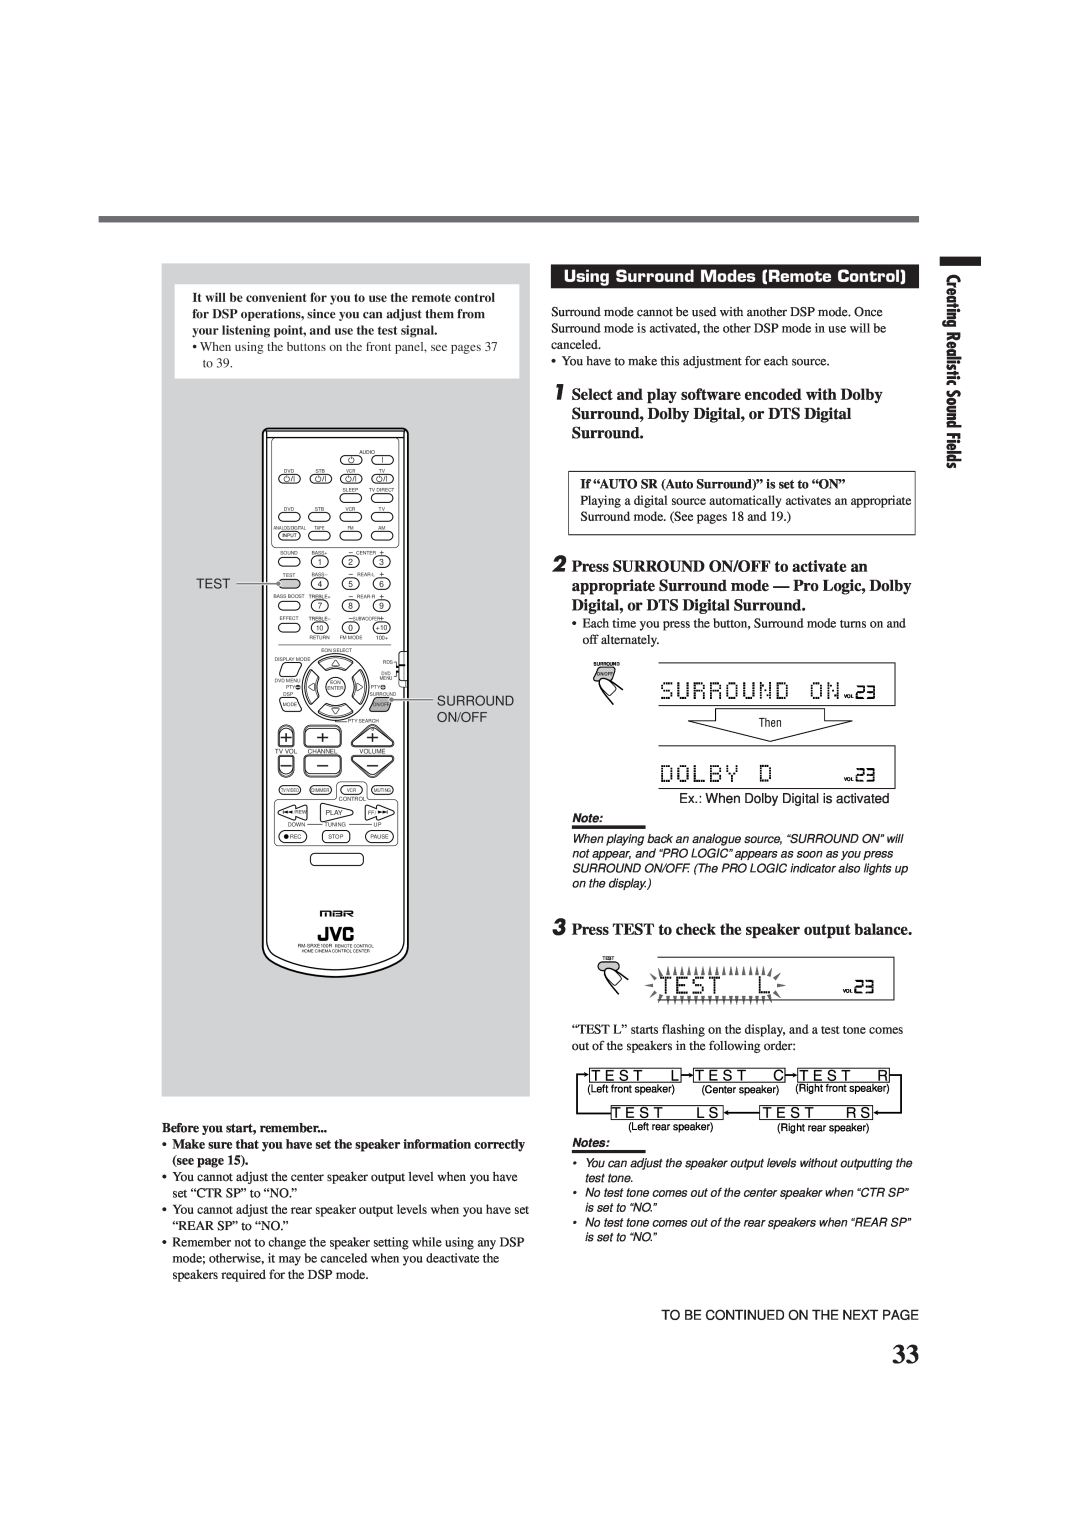 JVC RX-E100RSL manual Using Surround Modes Remote Control, 3Press TEST to check the speaker output balance 